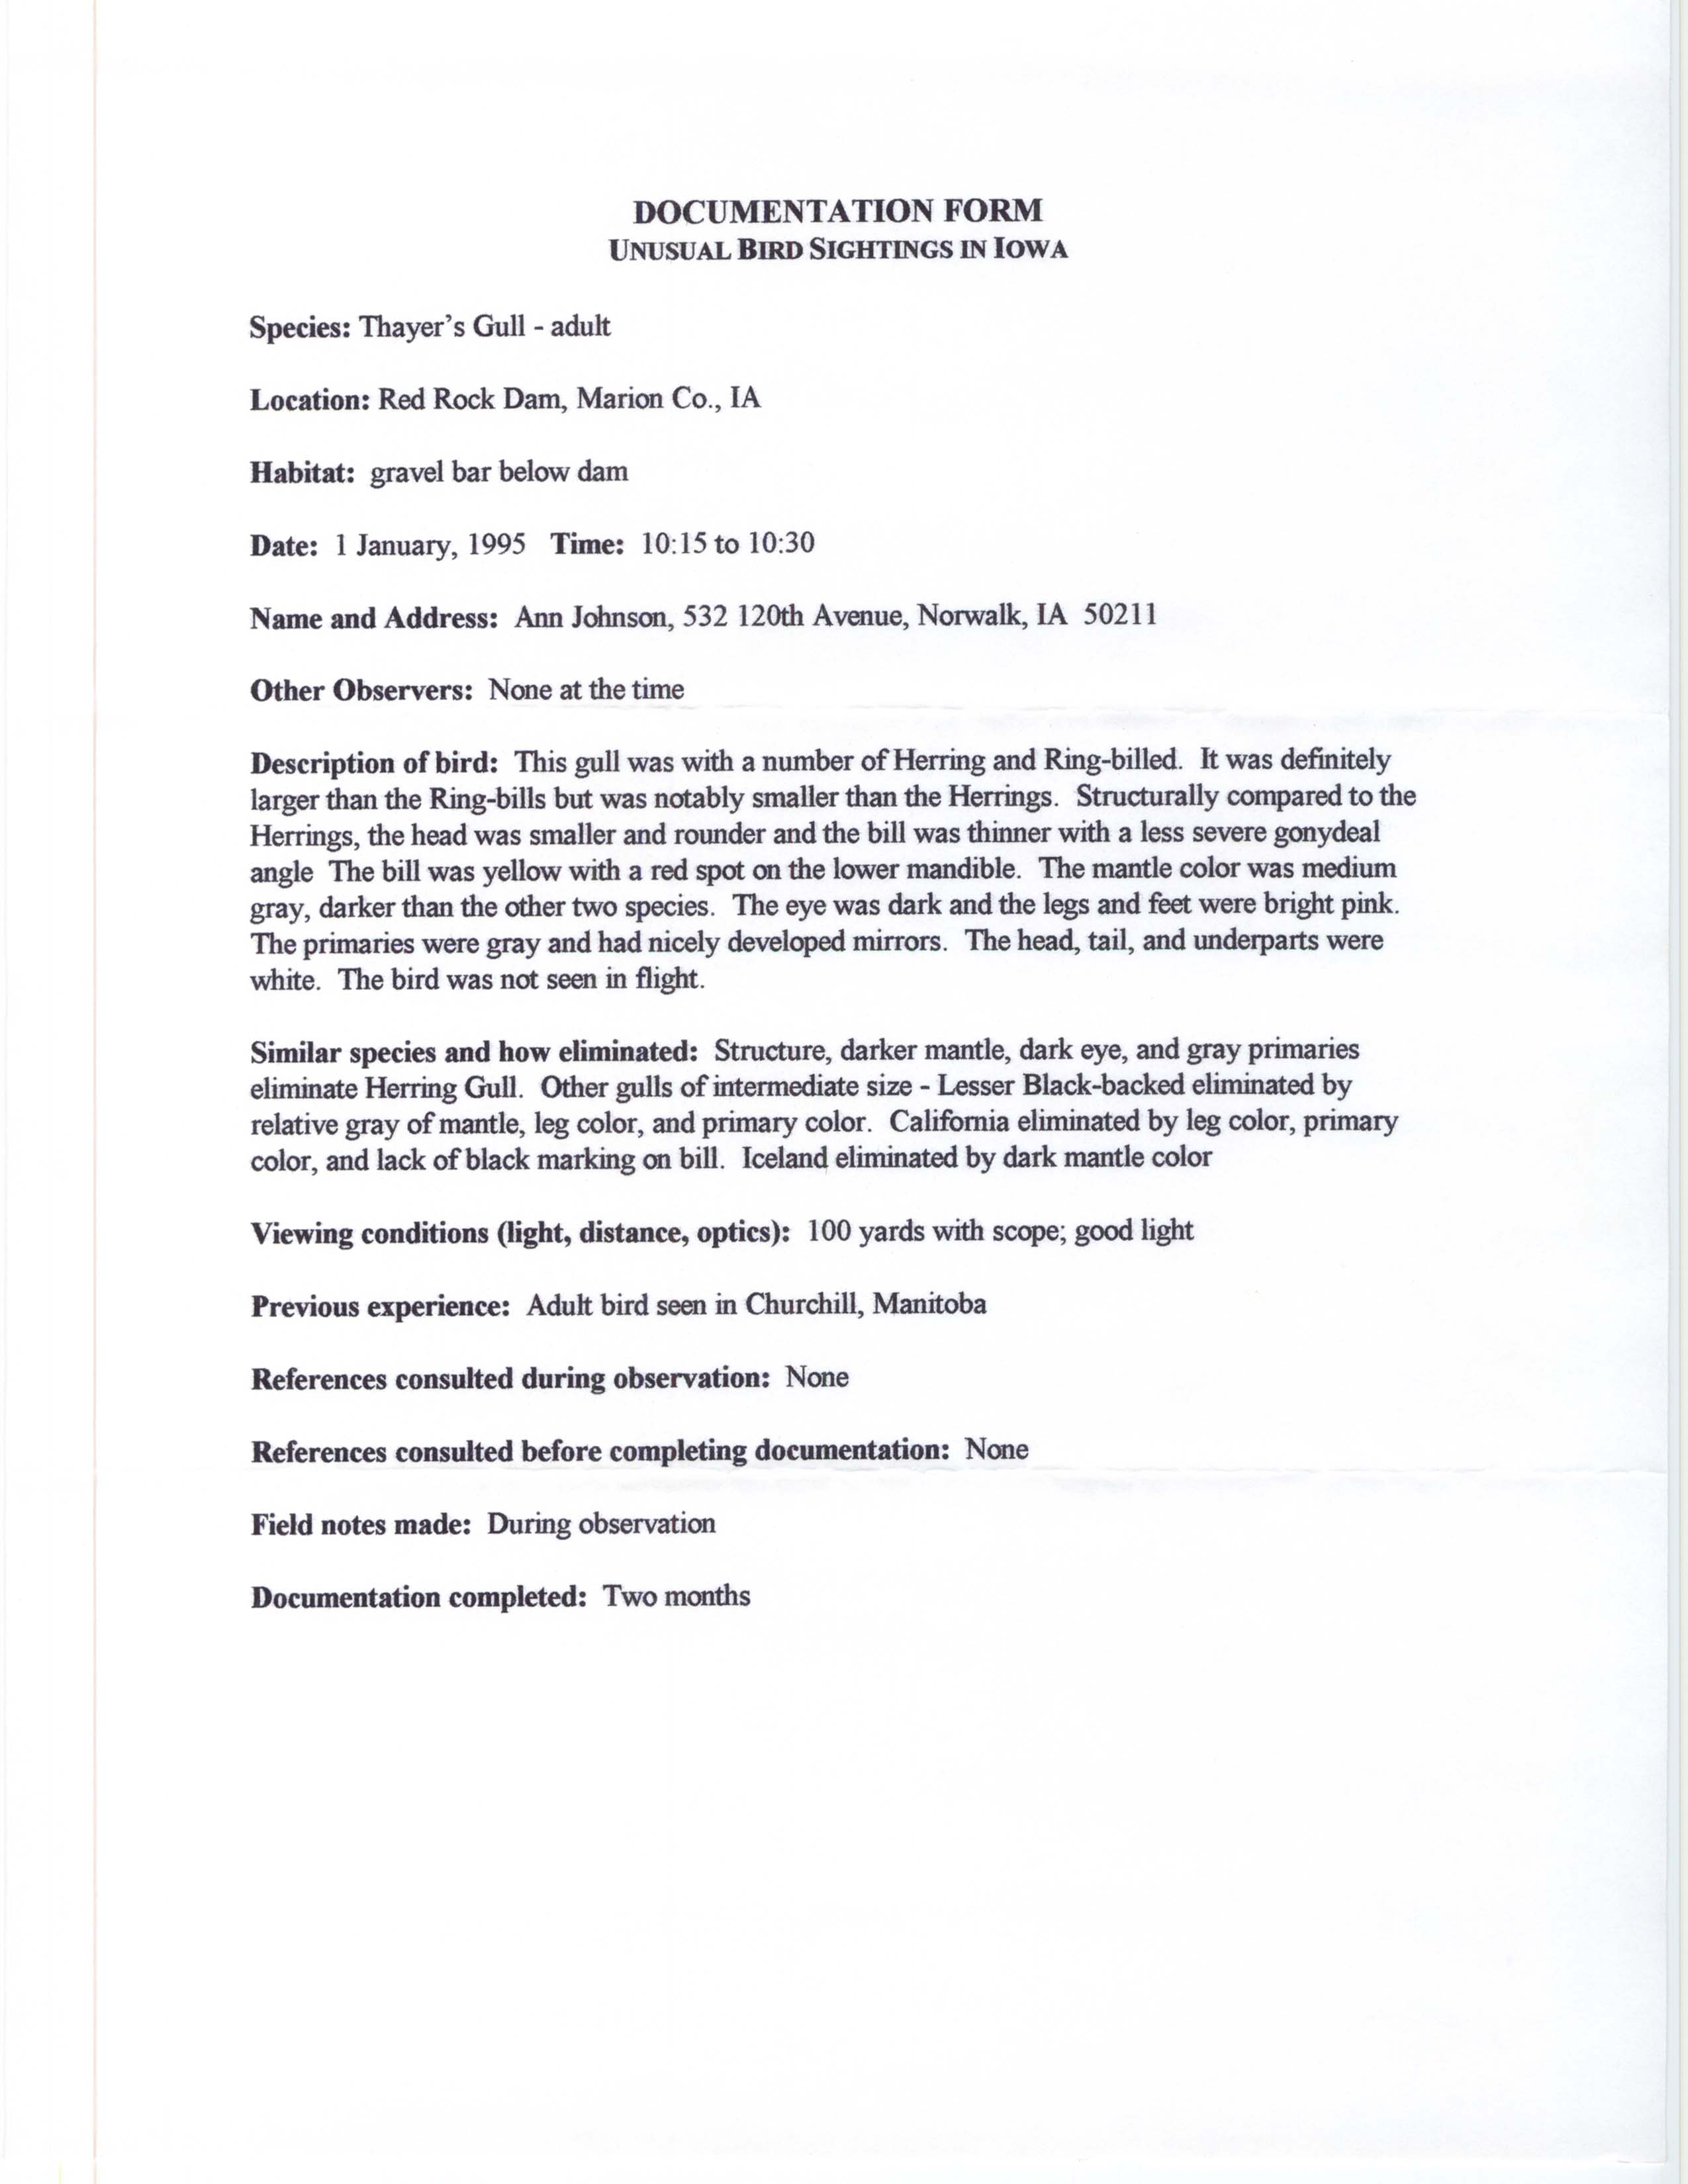 Rare bird documentation form for Thayer's Gull at Red Rock Dam, 1995